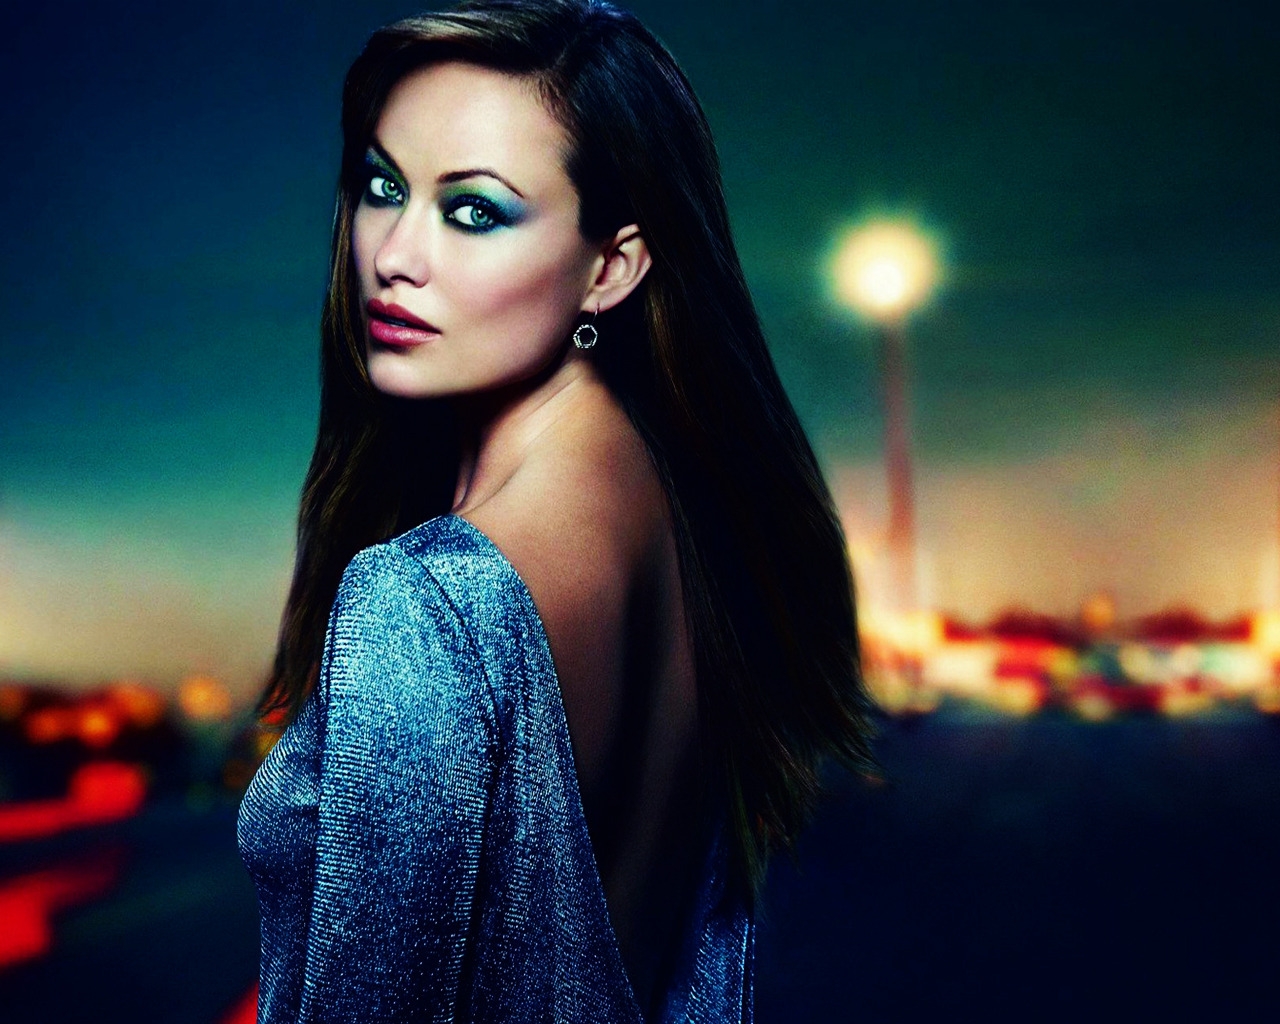 Olivia Wilde Profile Look for 1280 x 1024 resolution